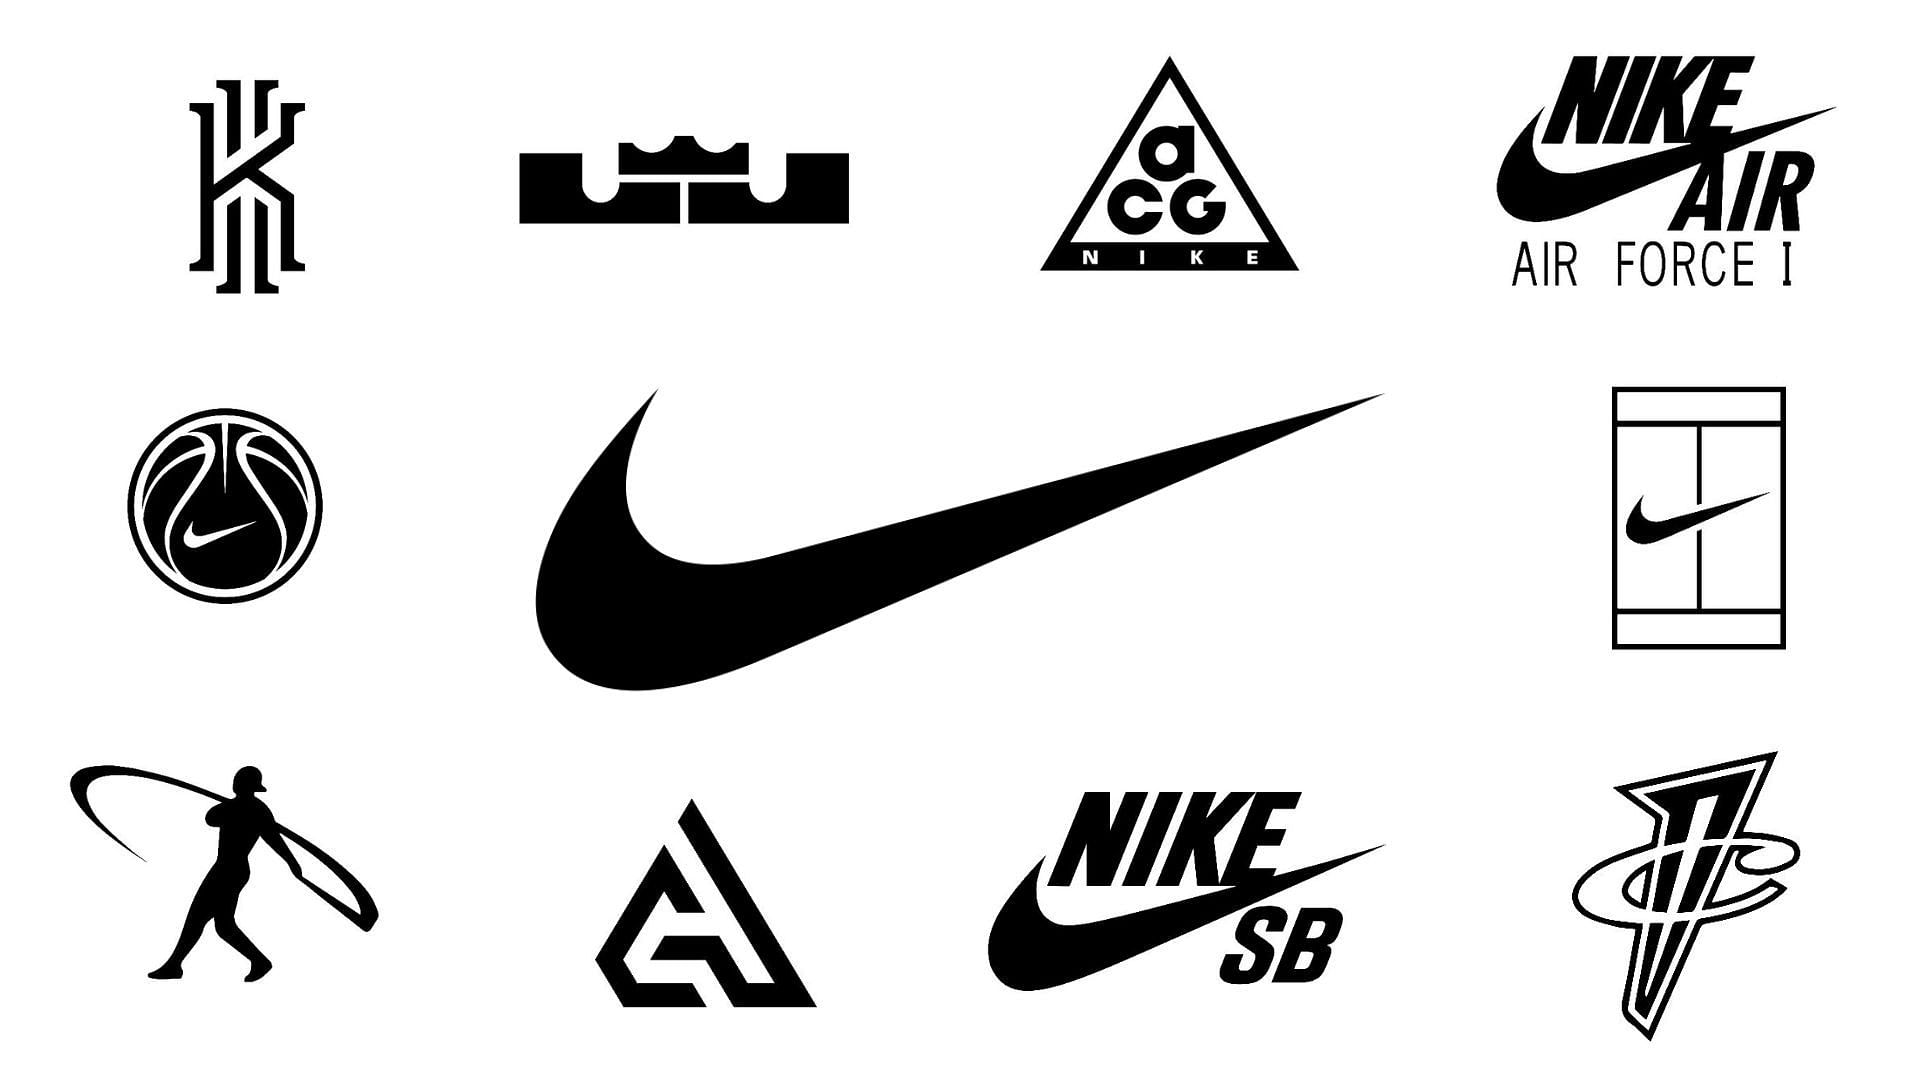 How many different kinds of Nike sneakers are